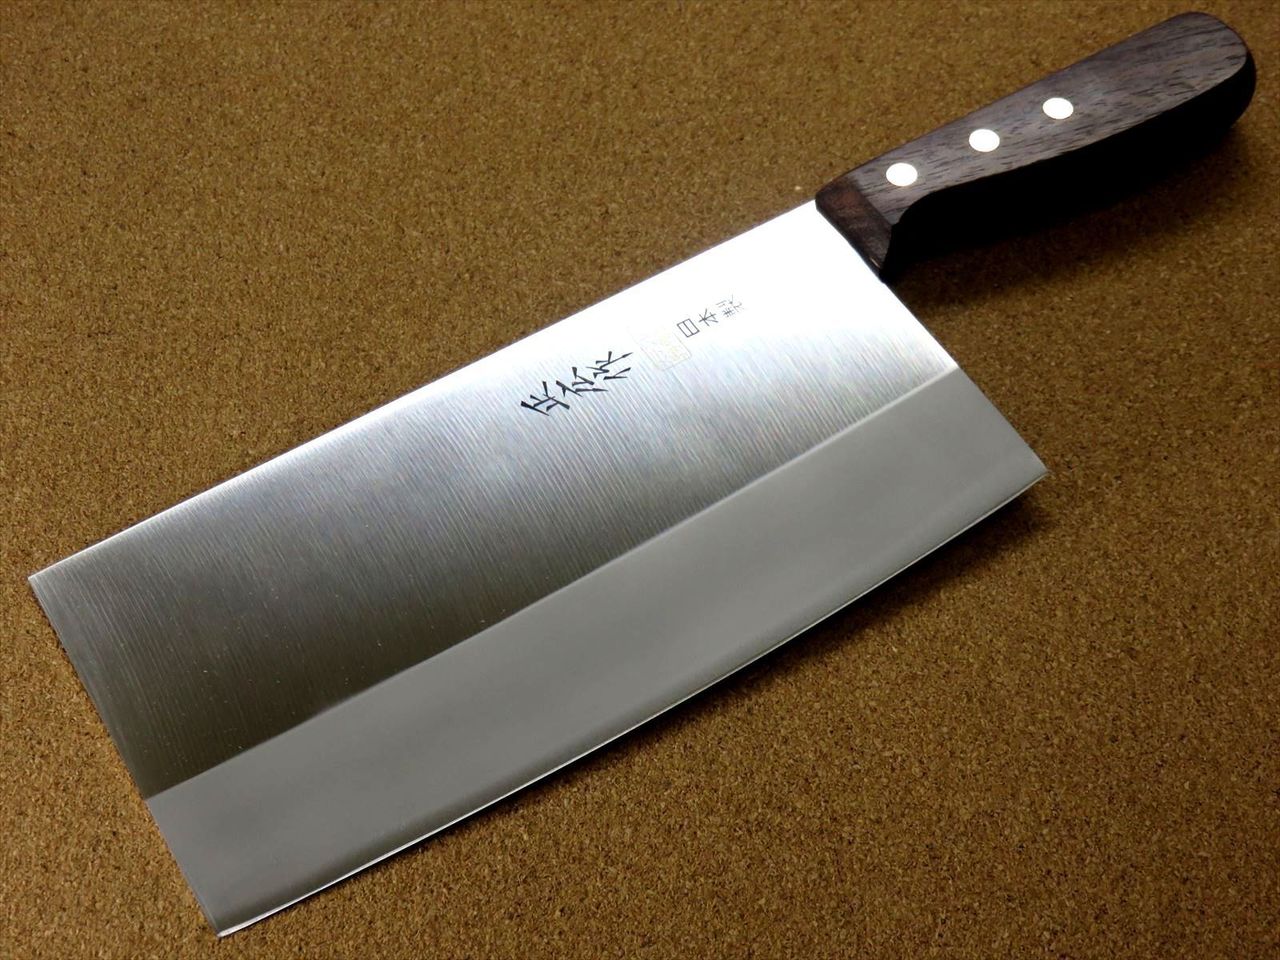 Crude Premium Chinese Cleaver Vegetable Chef Knife, 8 Inch Narrow Carbon  Steel -  Israel